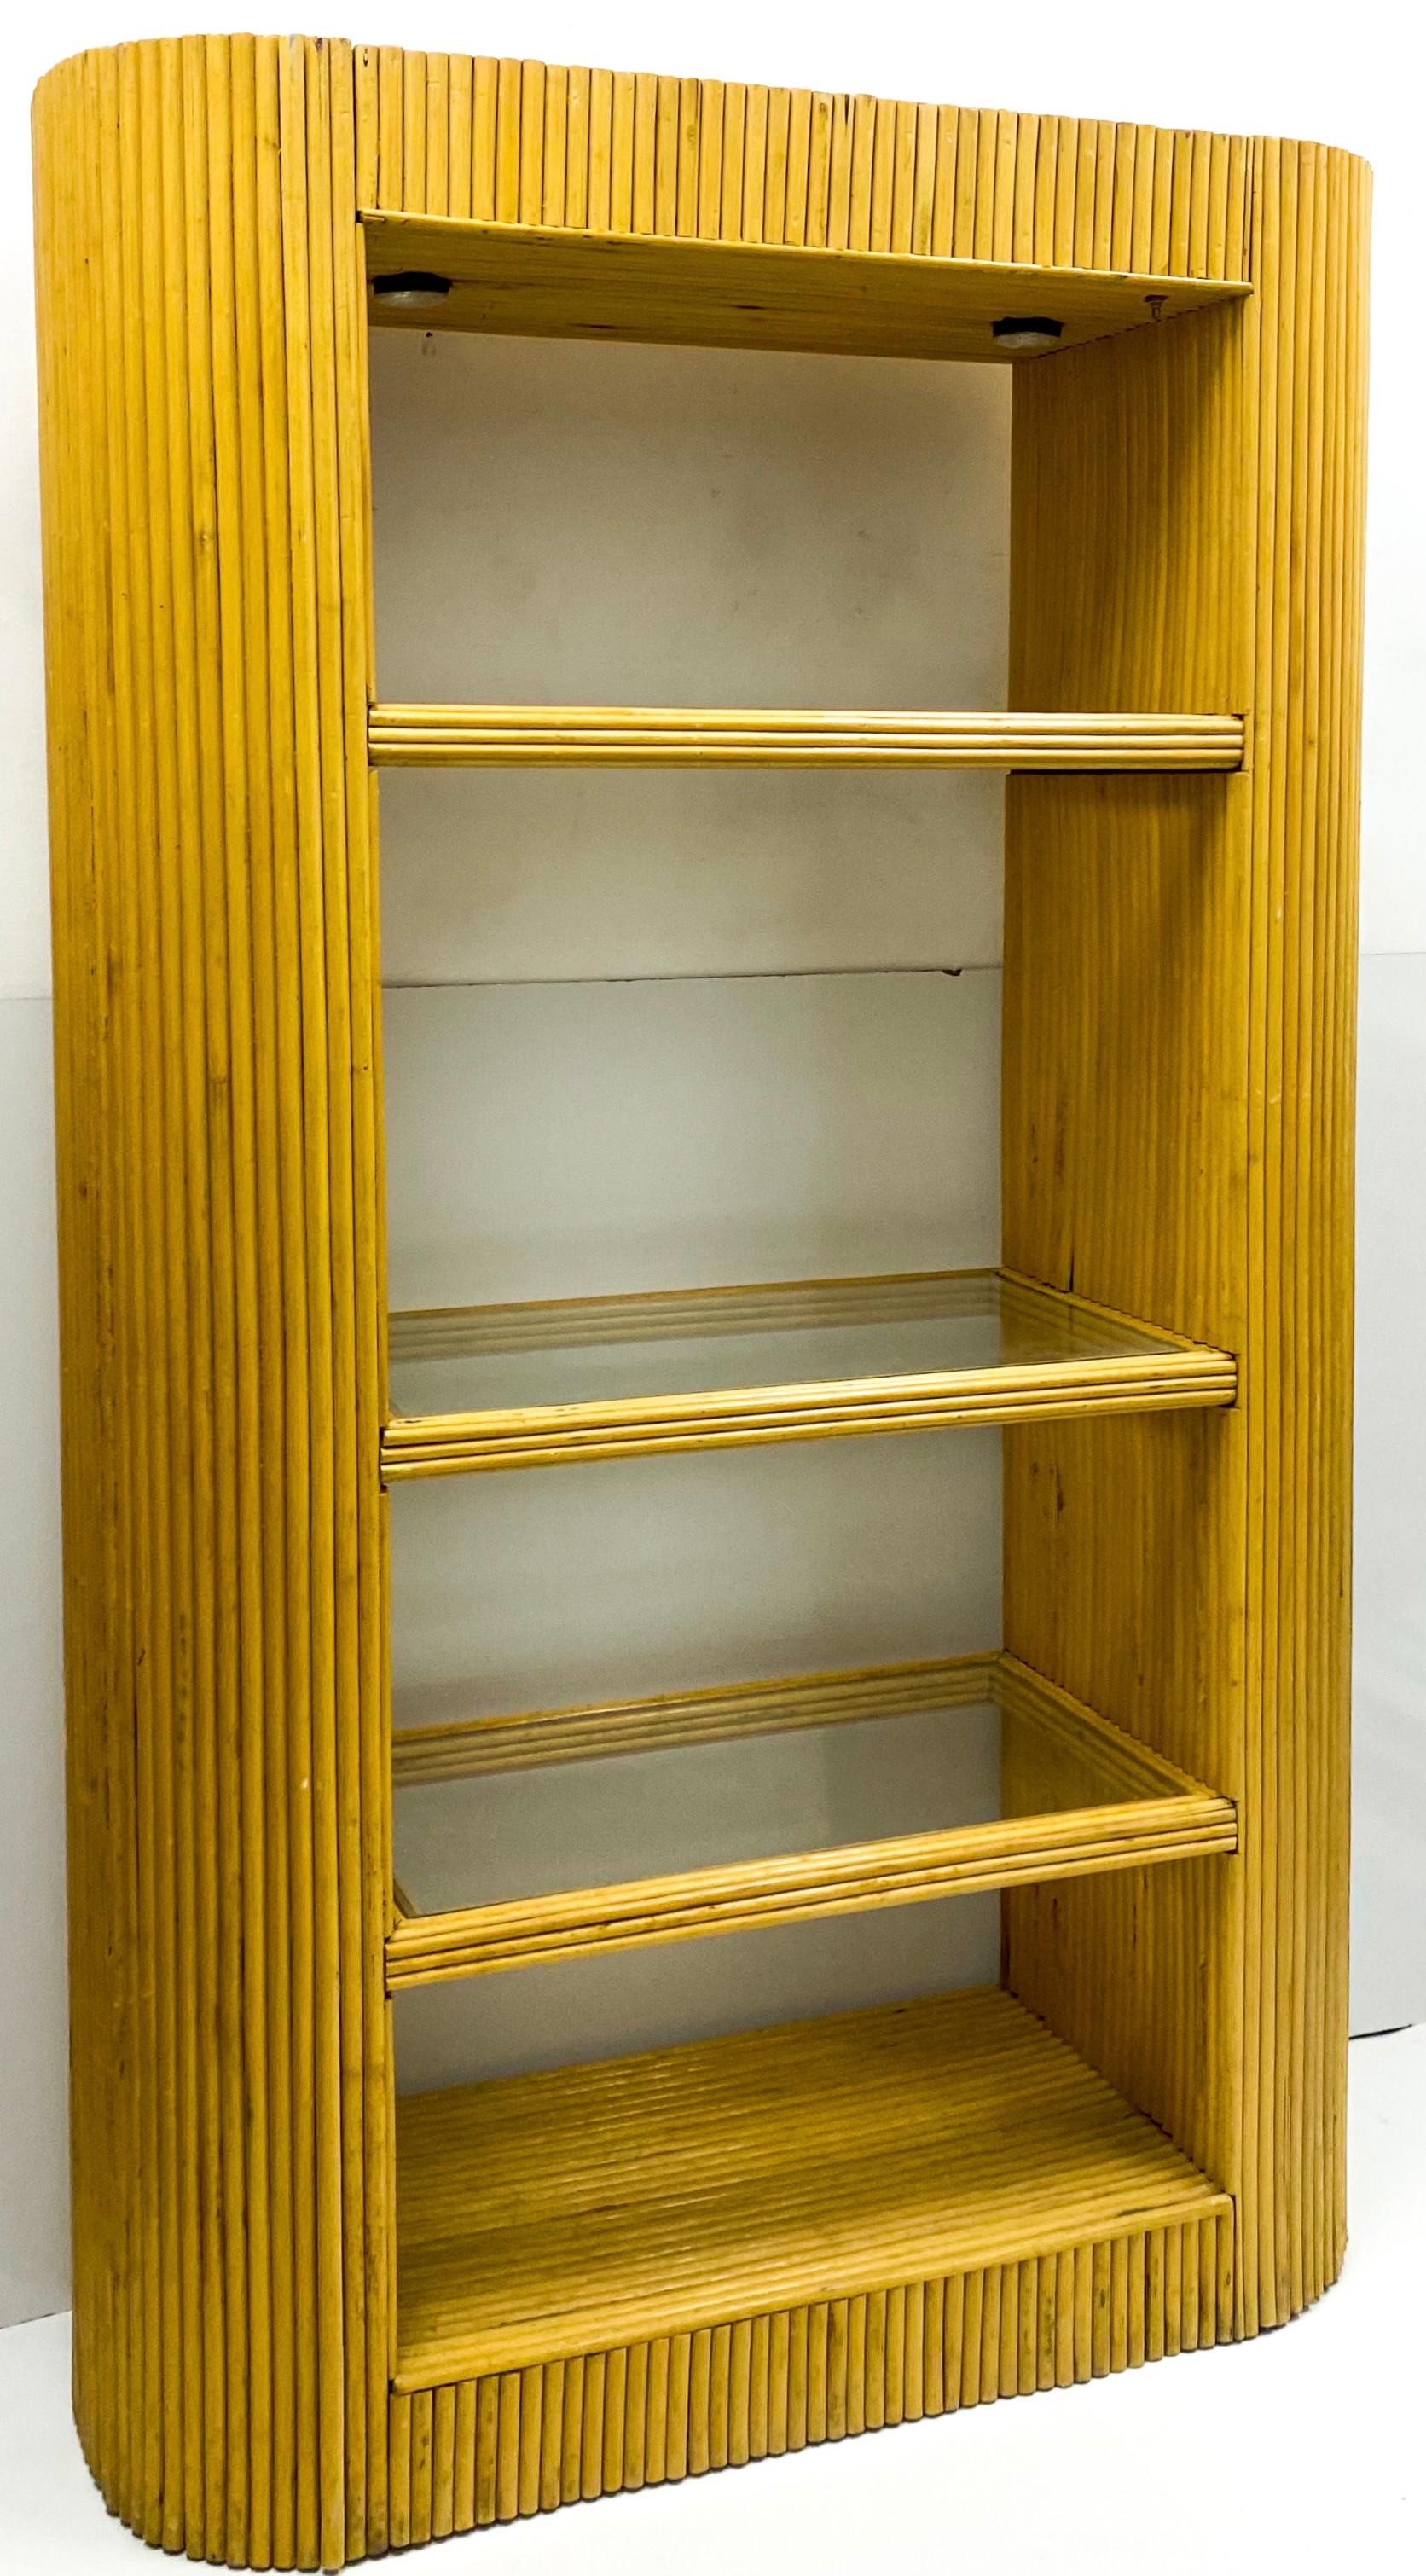 This is a 1970s Italian pencil bamboo etagere. It was finished by George Pazzano, but the maker’s mark is somewhat illegible. The shelves are glass. It is illuminated. From the floor upward is: 6”, 20”, 36”, 58.25”.